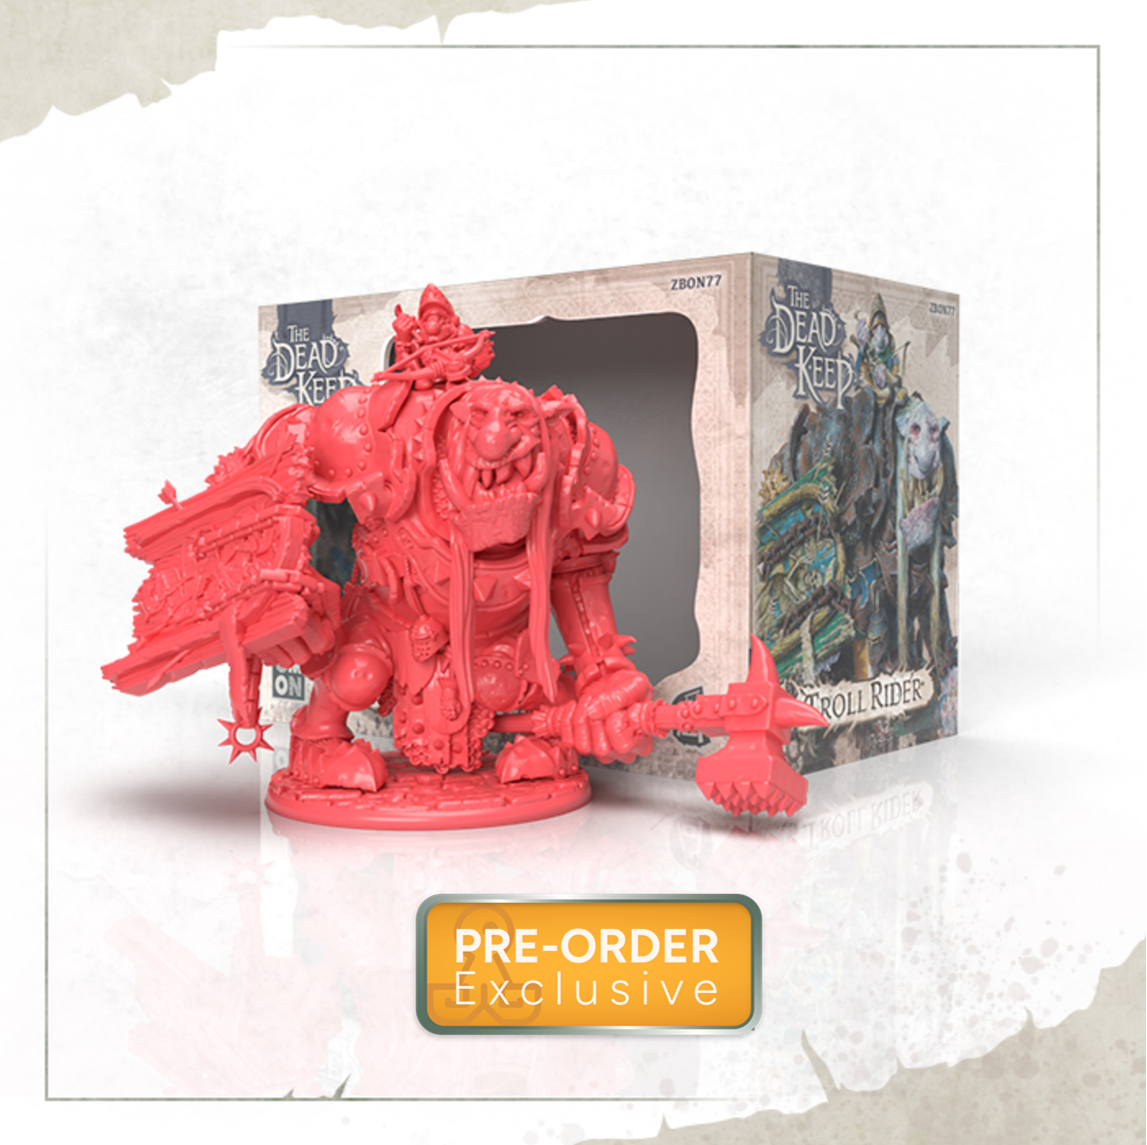 Crowdfunding Exclusive The Dead Keep Board Game Troll Rider Miniature